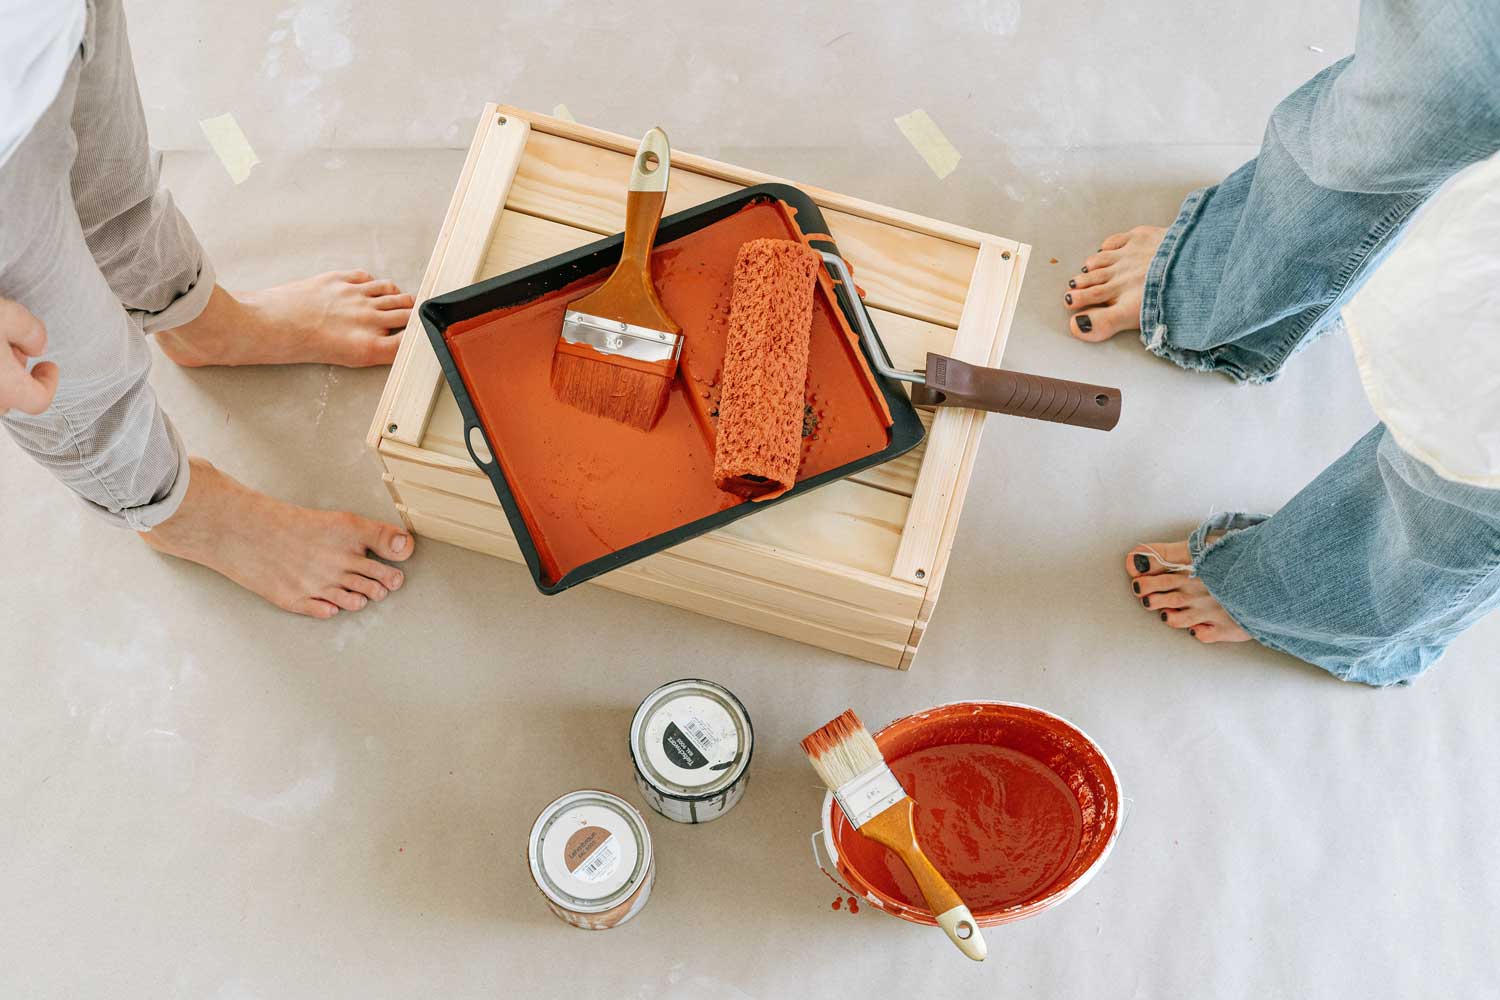 Couple painting home interior with orange paint bucket and paintbrushes